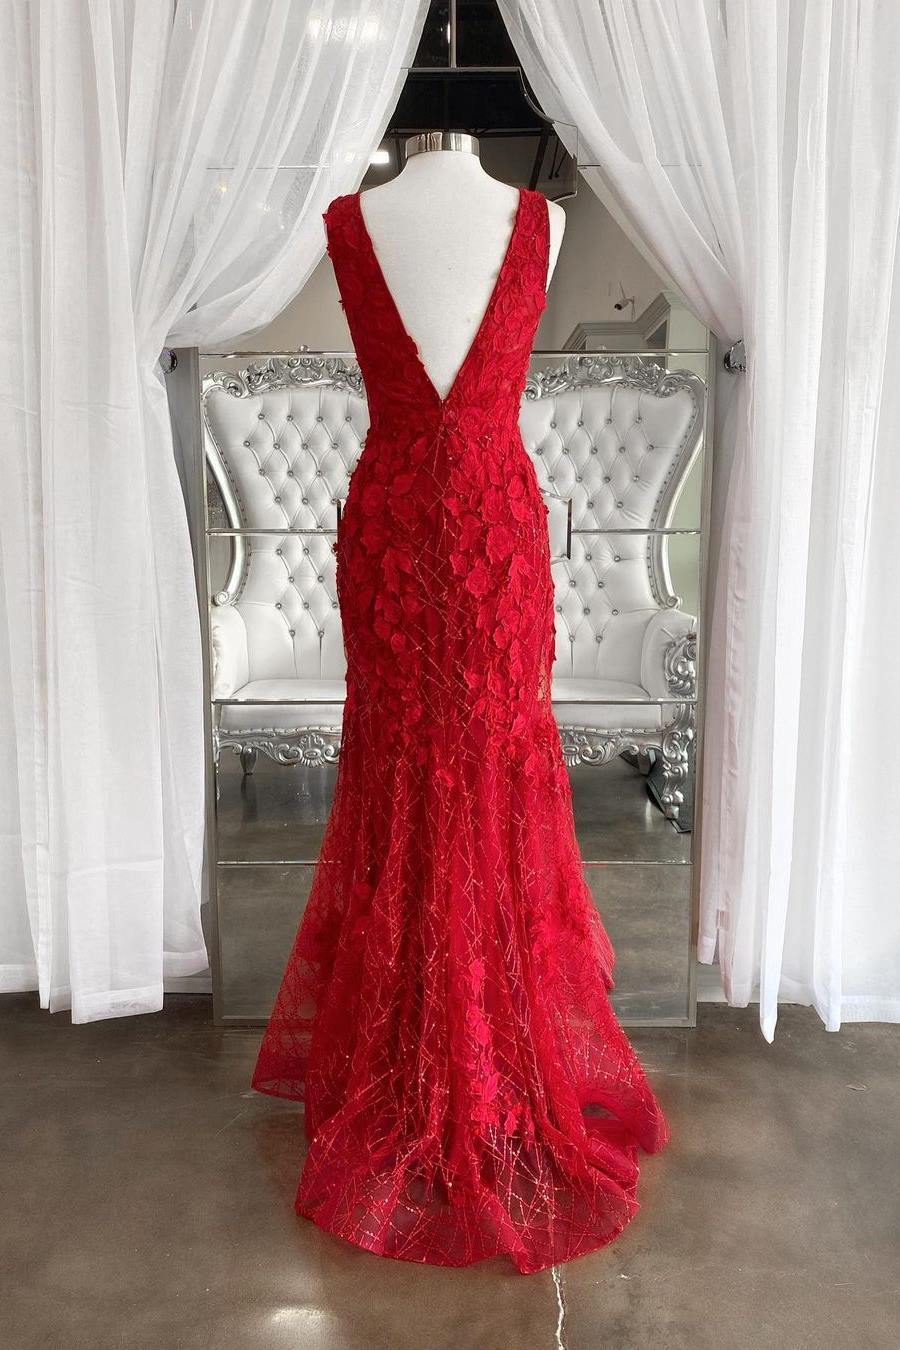 Plumgiong V-Neck Red Long Prom Dress with Appliques,DS0249